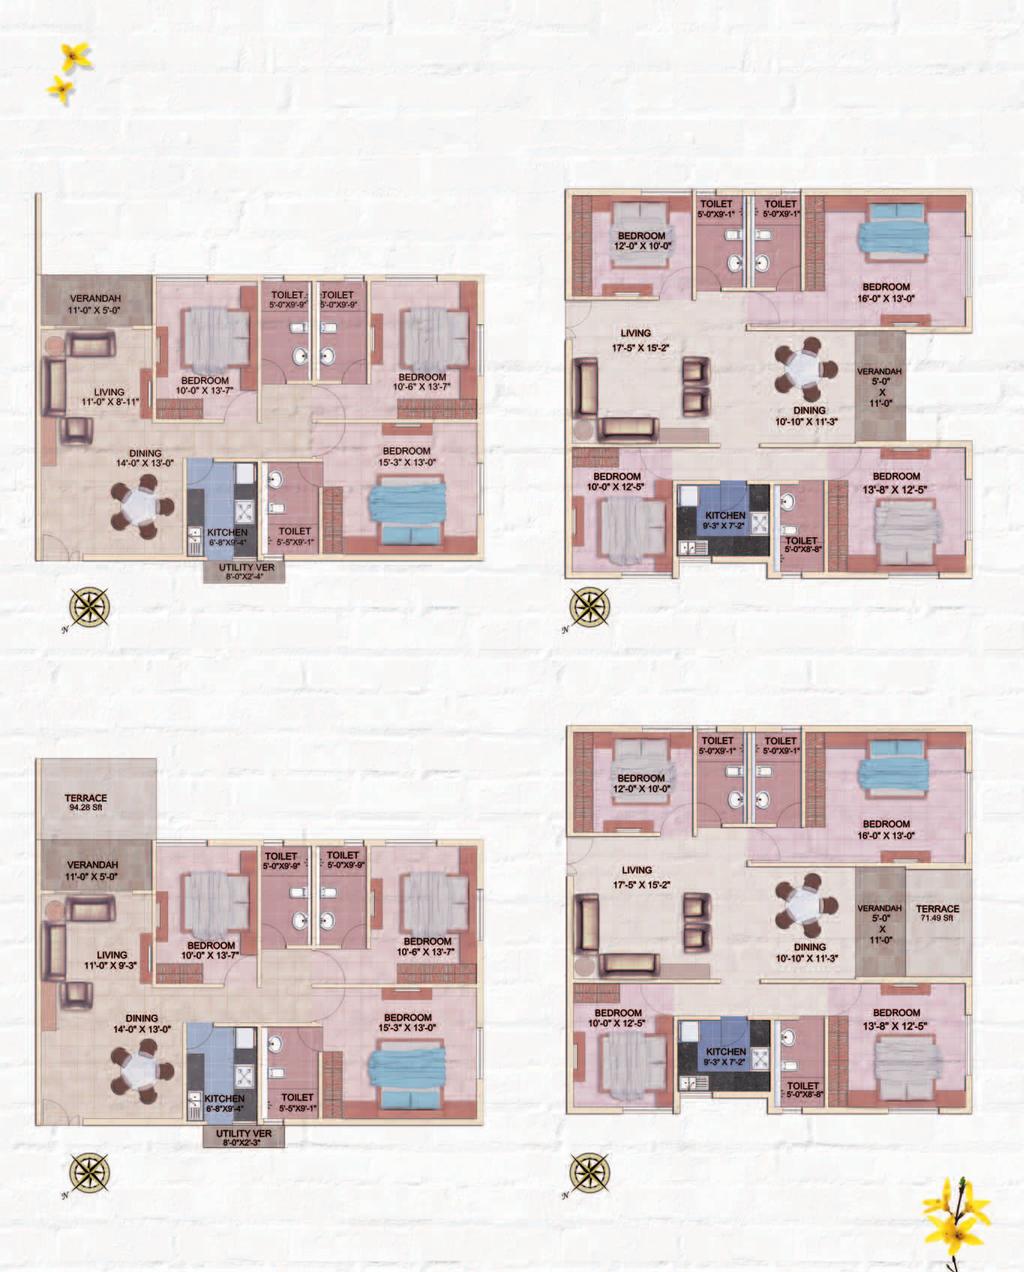 Flat B Floor Plan without Terrace Flat B at 3rd, 4th, 5th, 6th, 8th, 9th, 11th, 12th,14th,15th,17th &18th Floors Flat C Floor Plan without Terrace Flat C at 3rd, 4th, 5th, 6th, 8th, 9th, 11th,